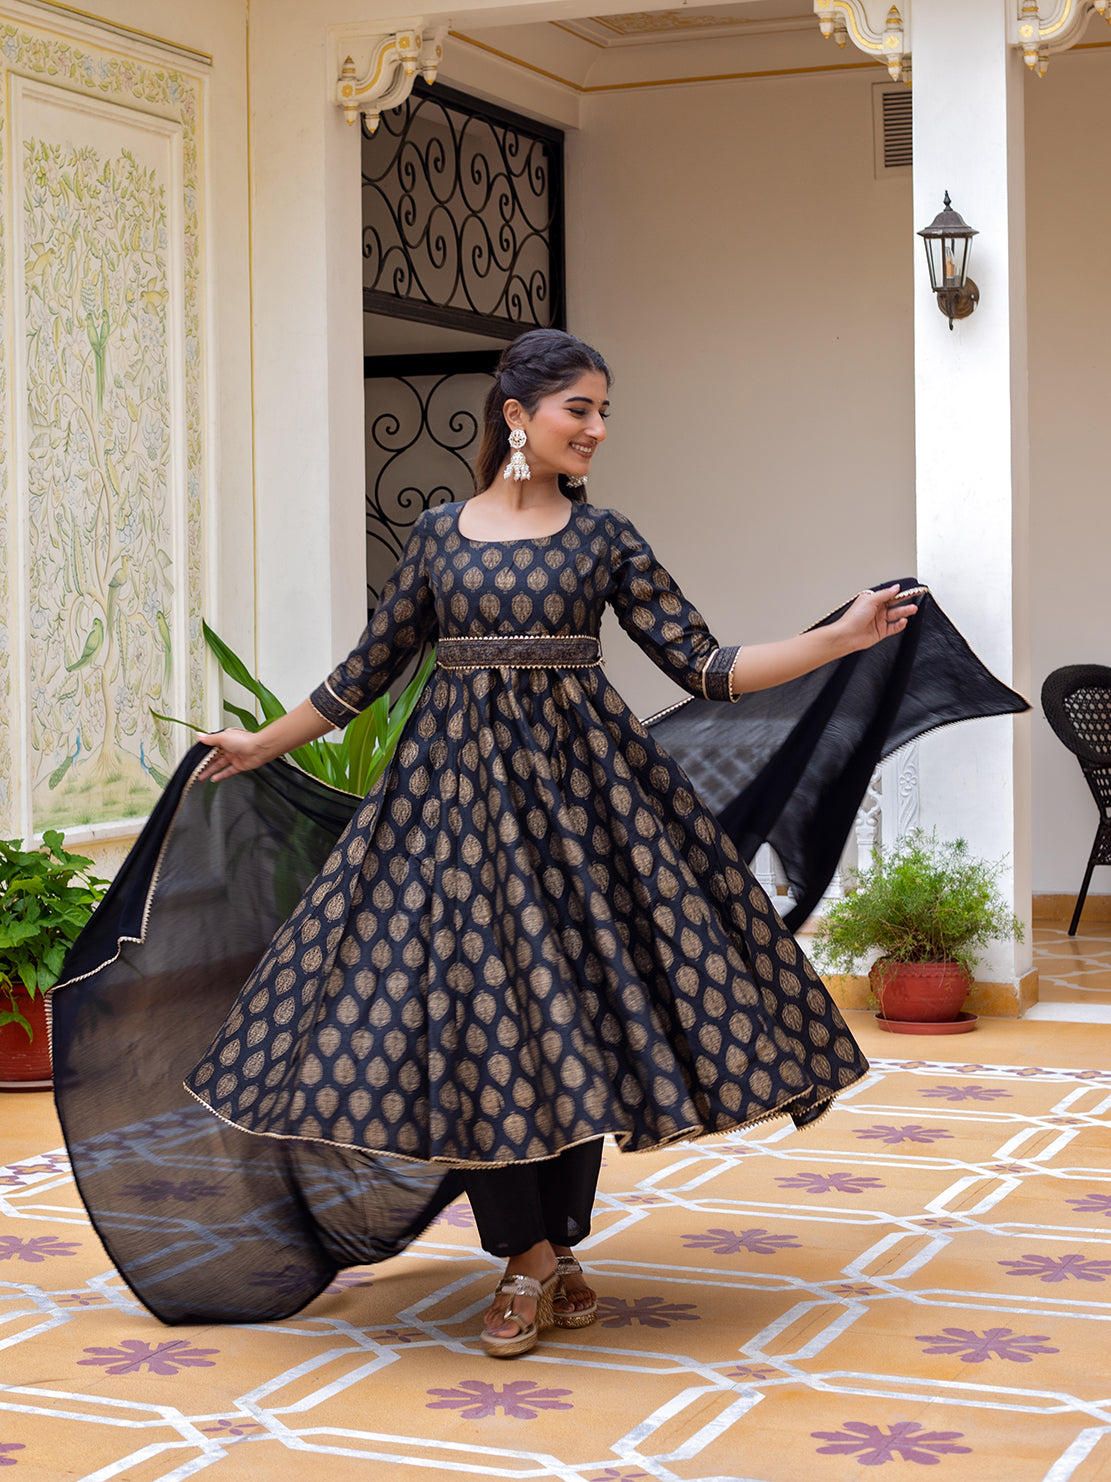 this-black-anarkali-with-a-screen-printed-all-over-golden-buta-is-the-perfect-choice-for-your-special-occasions-the-intricate-gold-embroidery-adds-a-subtle-sparkle-and-effortless-elegance-to-any-look